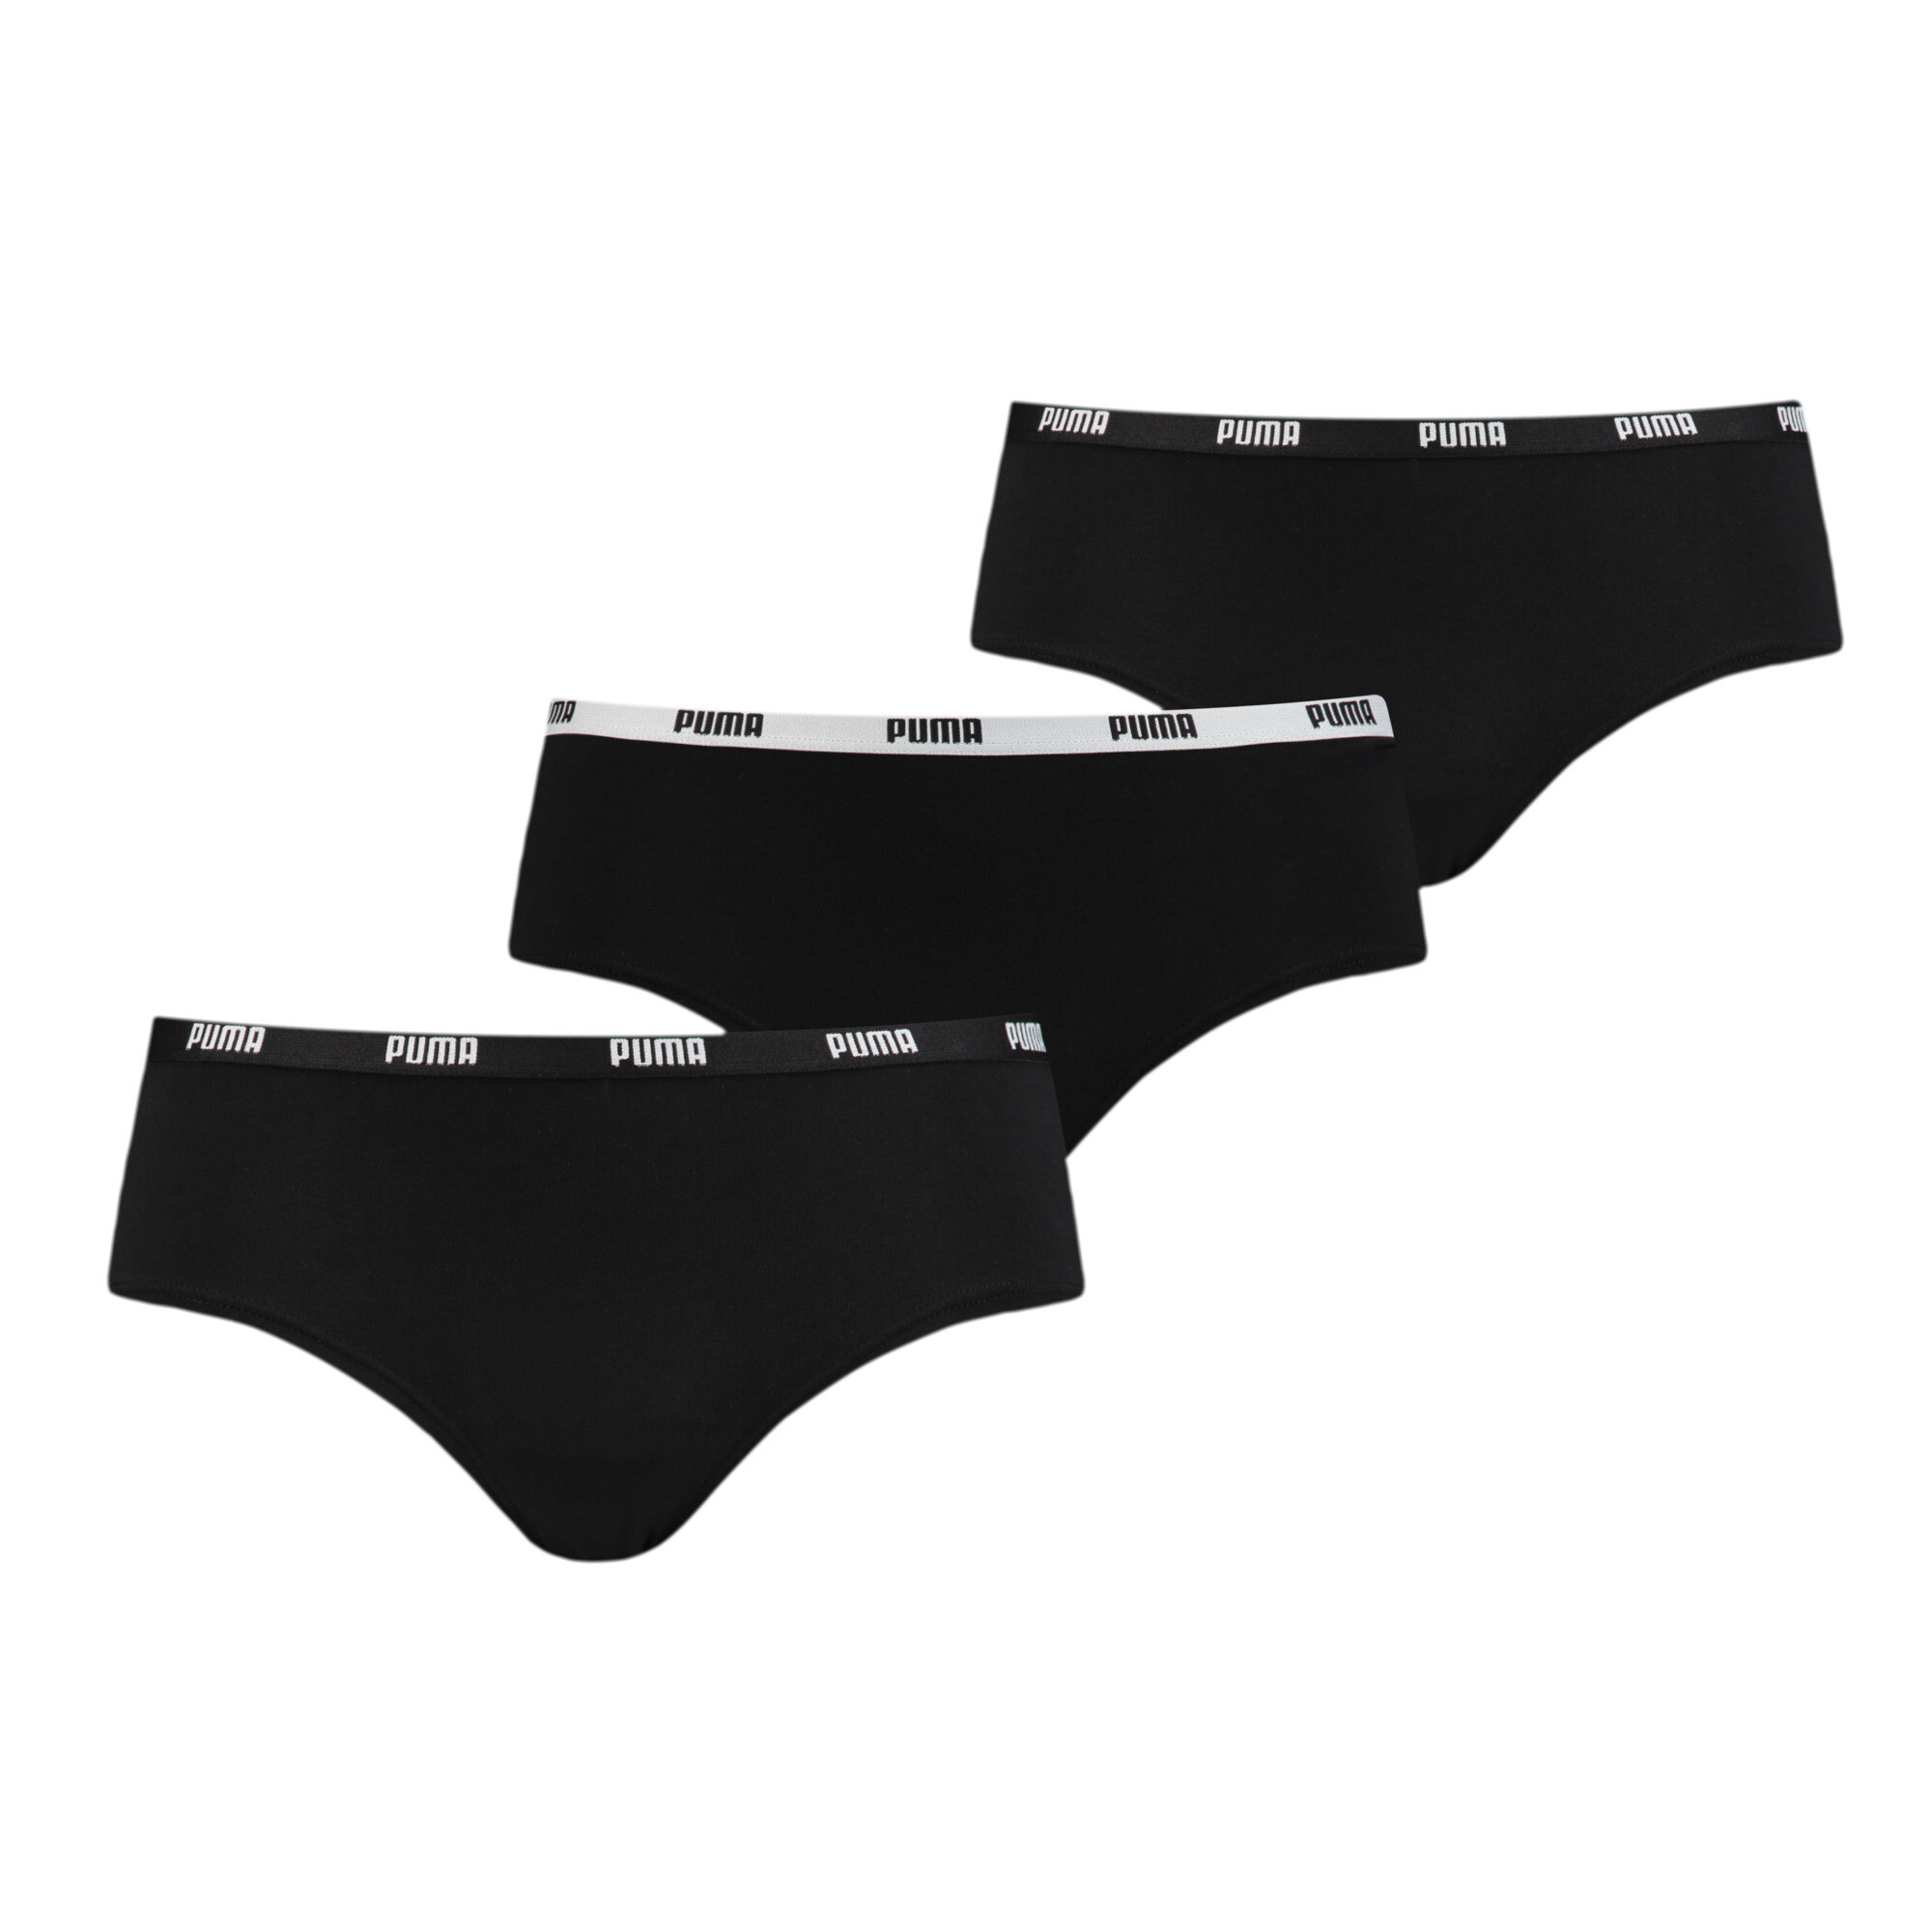 Women's PUMA Hipster Underwear 3 Pack In Black, Size Small